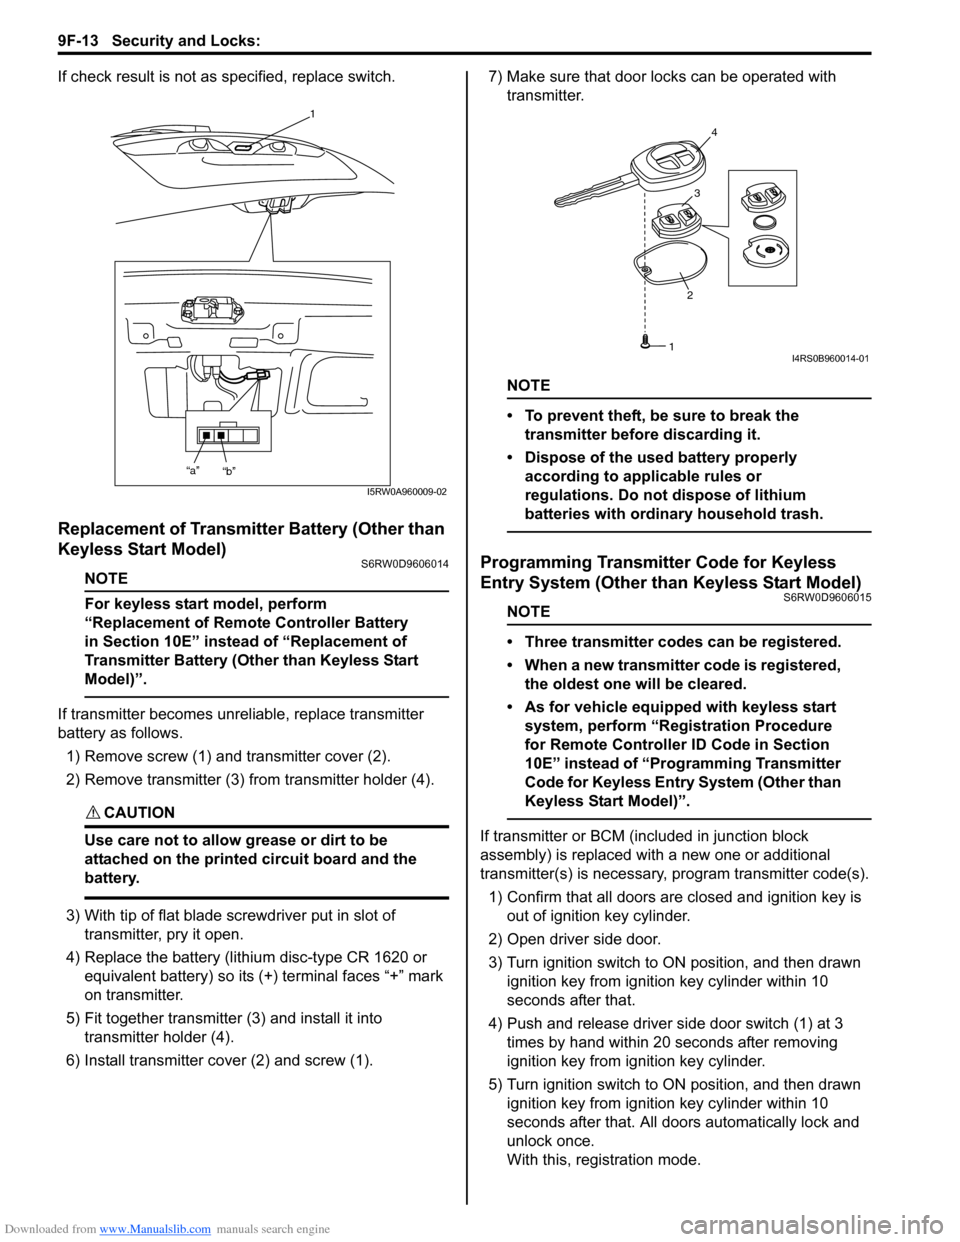 SUZUKI SX4 2006 1.G Service Workshop Manual Downloaded from www.Manualslib.com manuals search engine 9F-13 Security and Locks: 
If check result is not as specified, replace switch.
Replacement of Transmitter Battery (Other than 
Keyless Start M